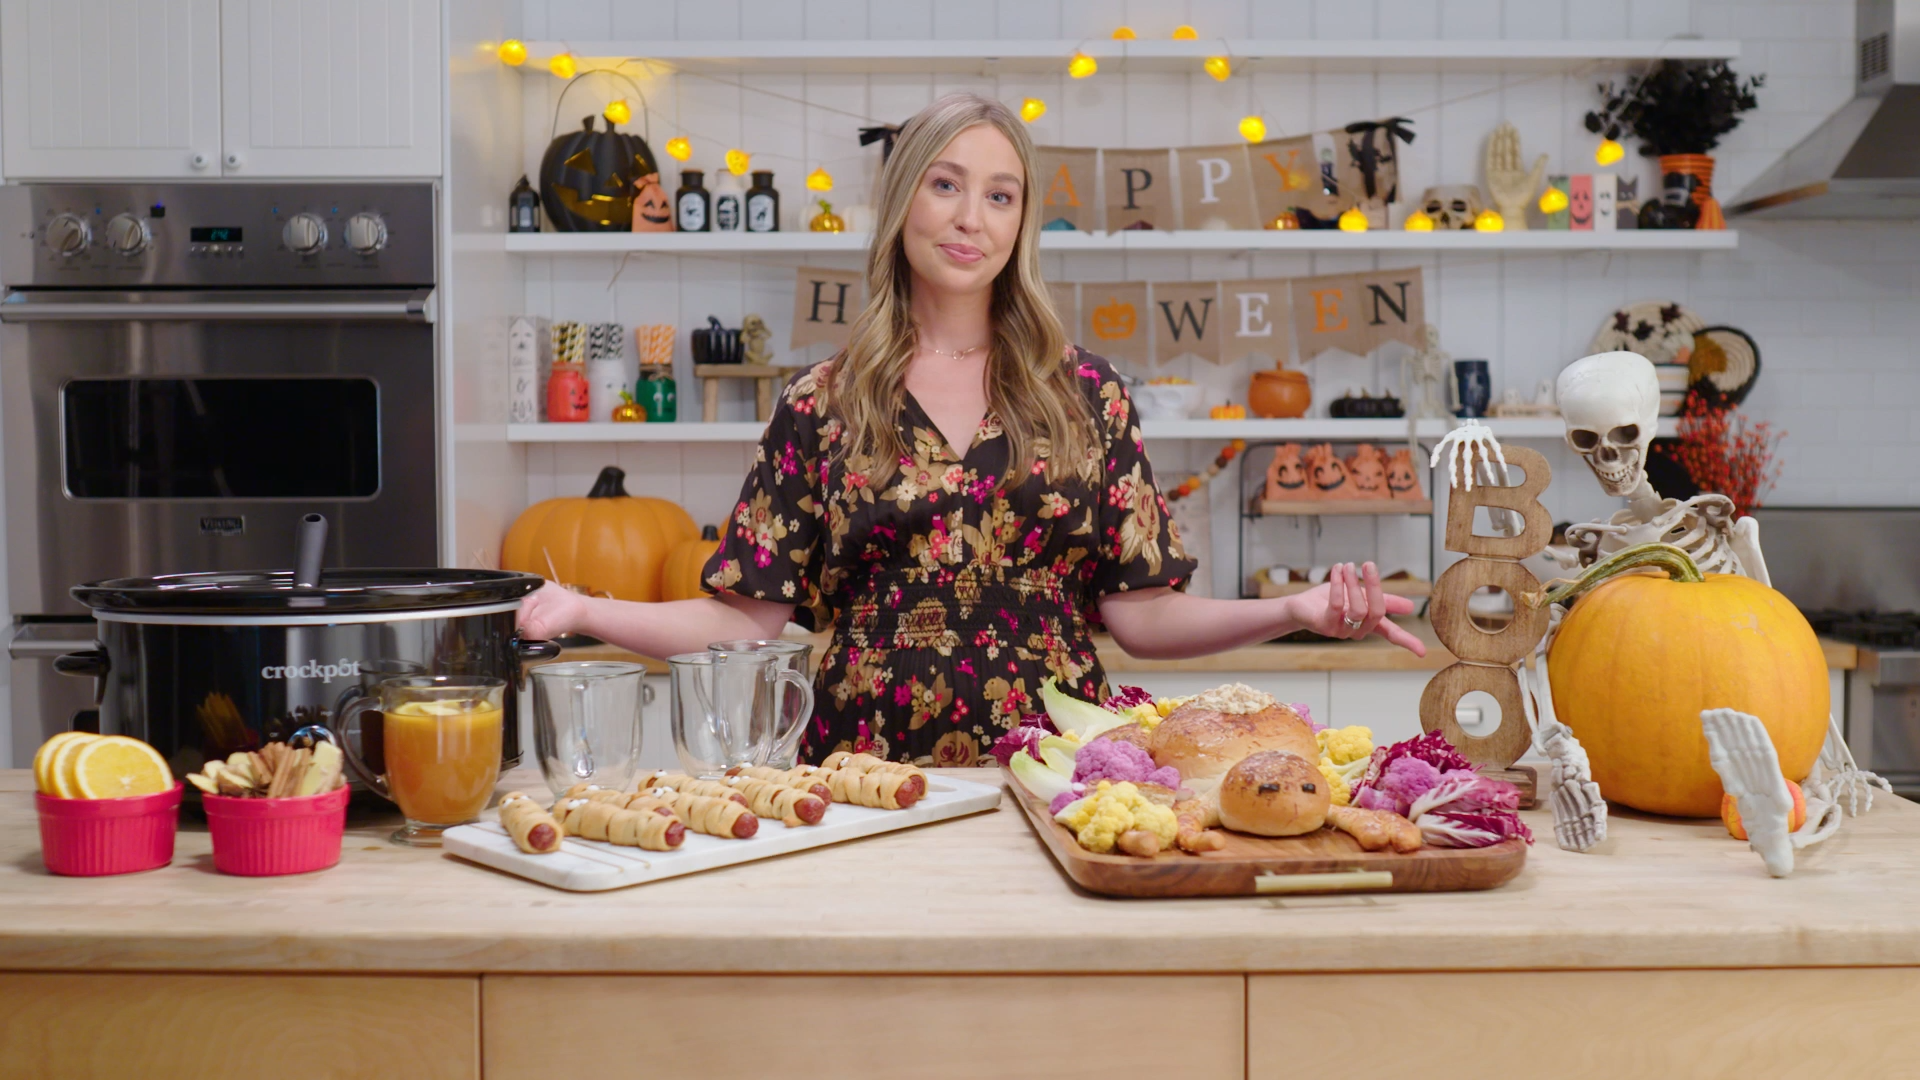 Skyler Bouchard standing in a kitchen, gesturing to a Halloween spread and items from Walmart